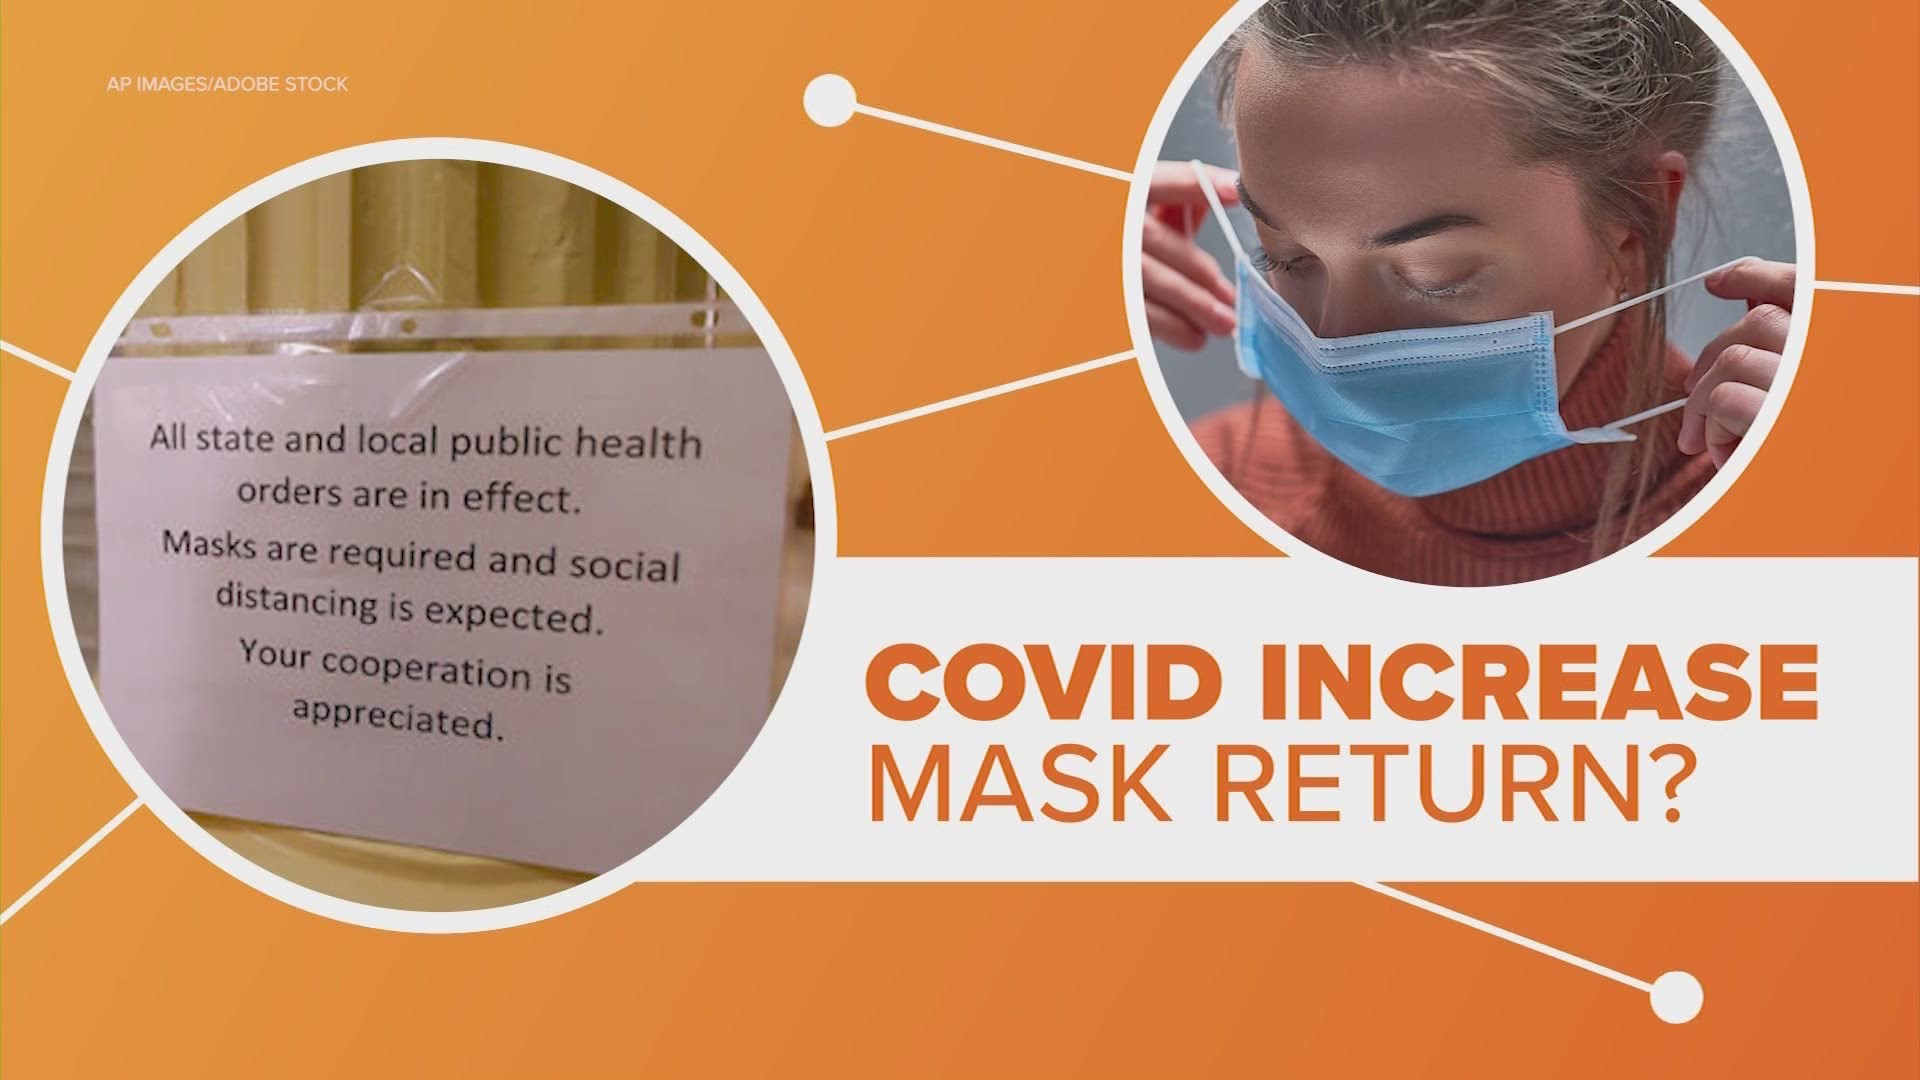 Increases in COVID cases and hospitalizations have some health experts calling for the return of face masks. So will the CDC change its message on masks?